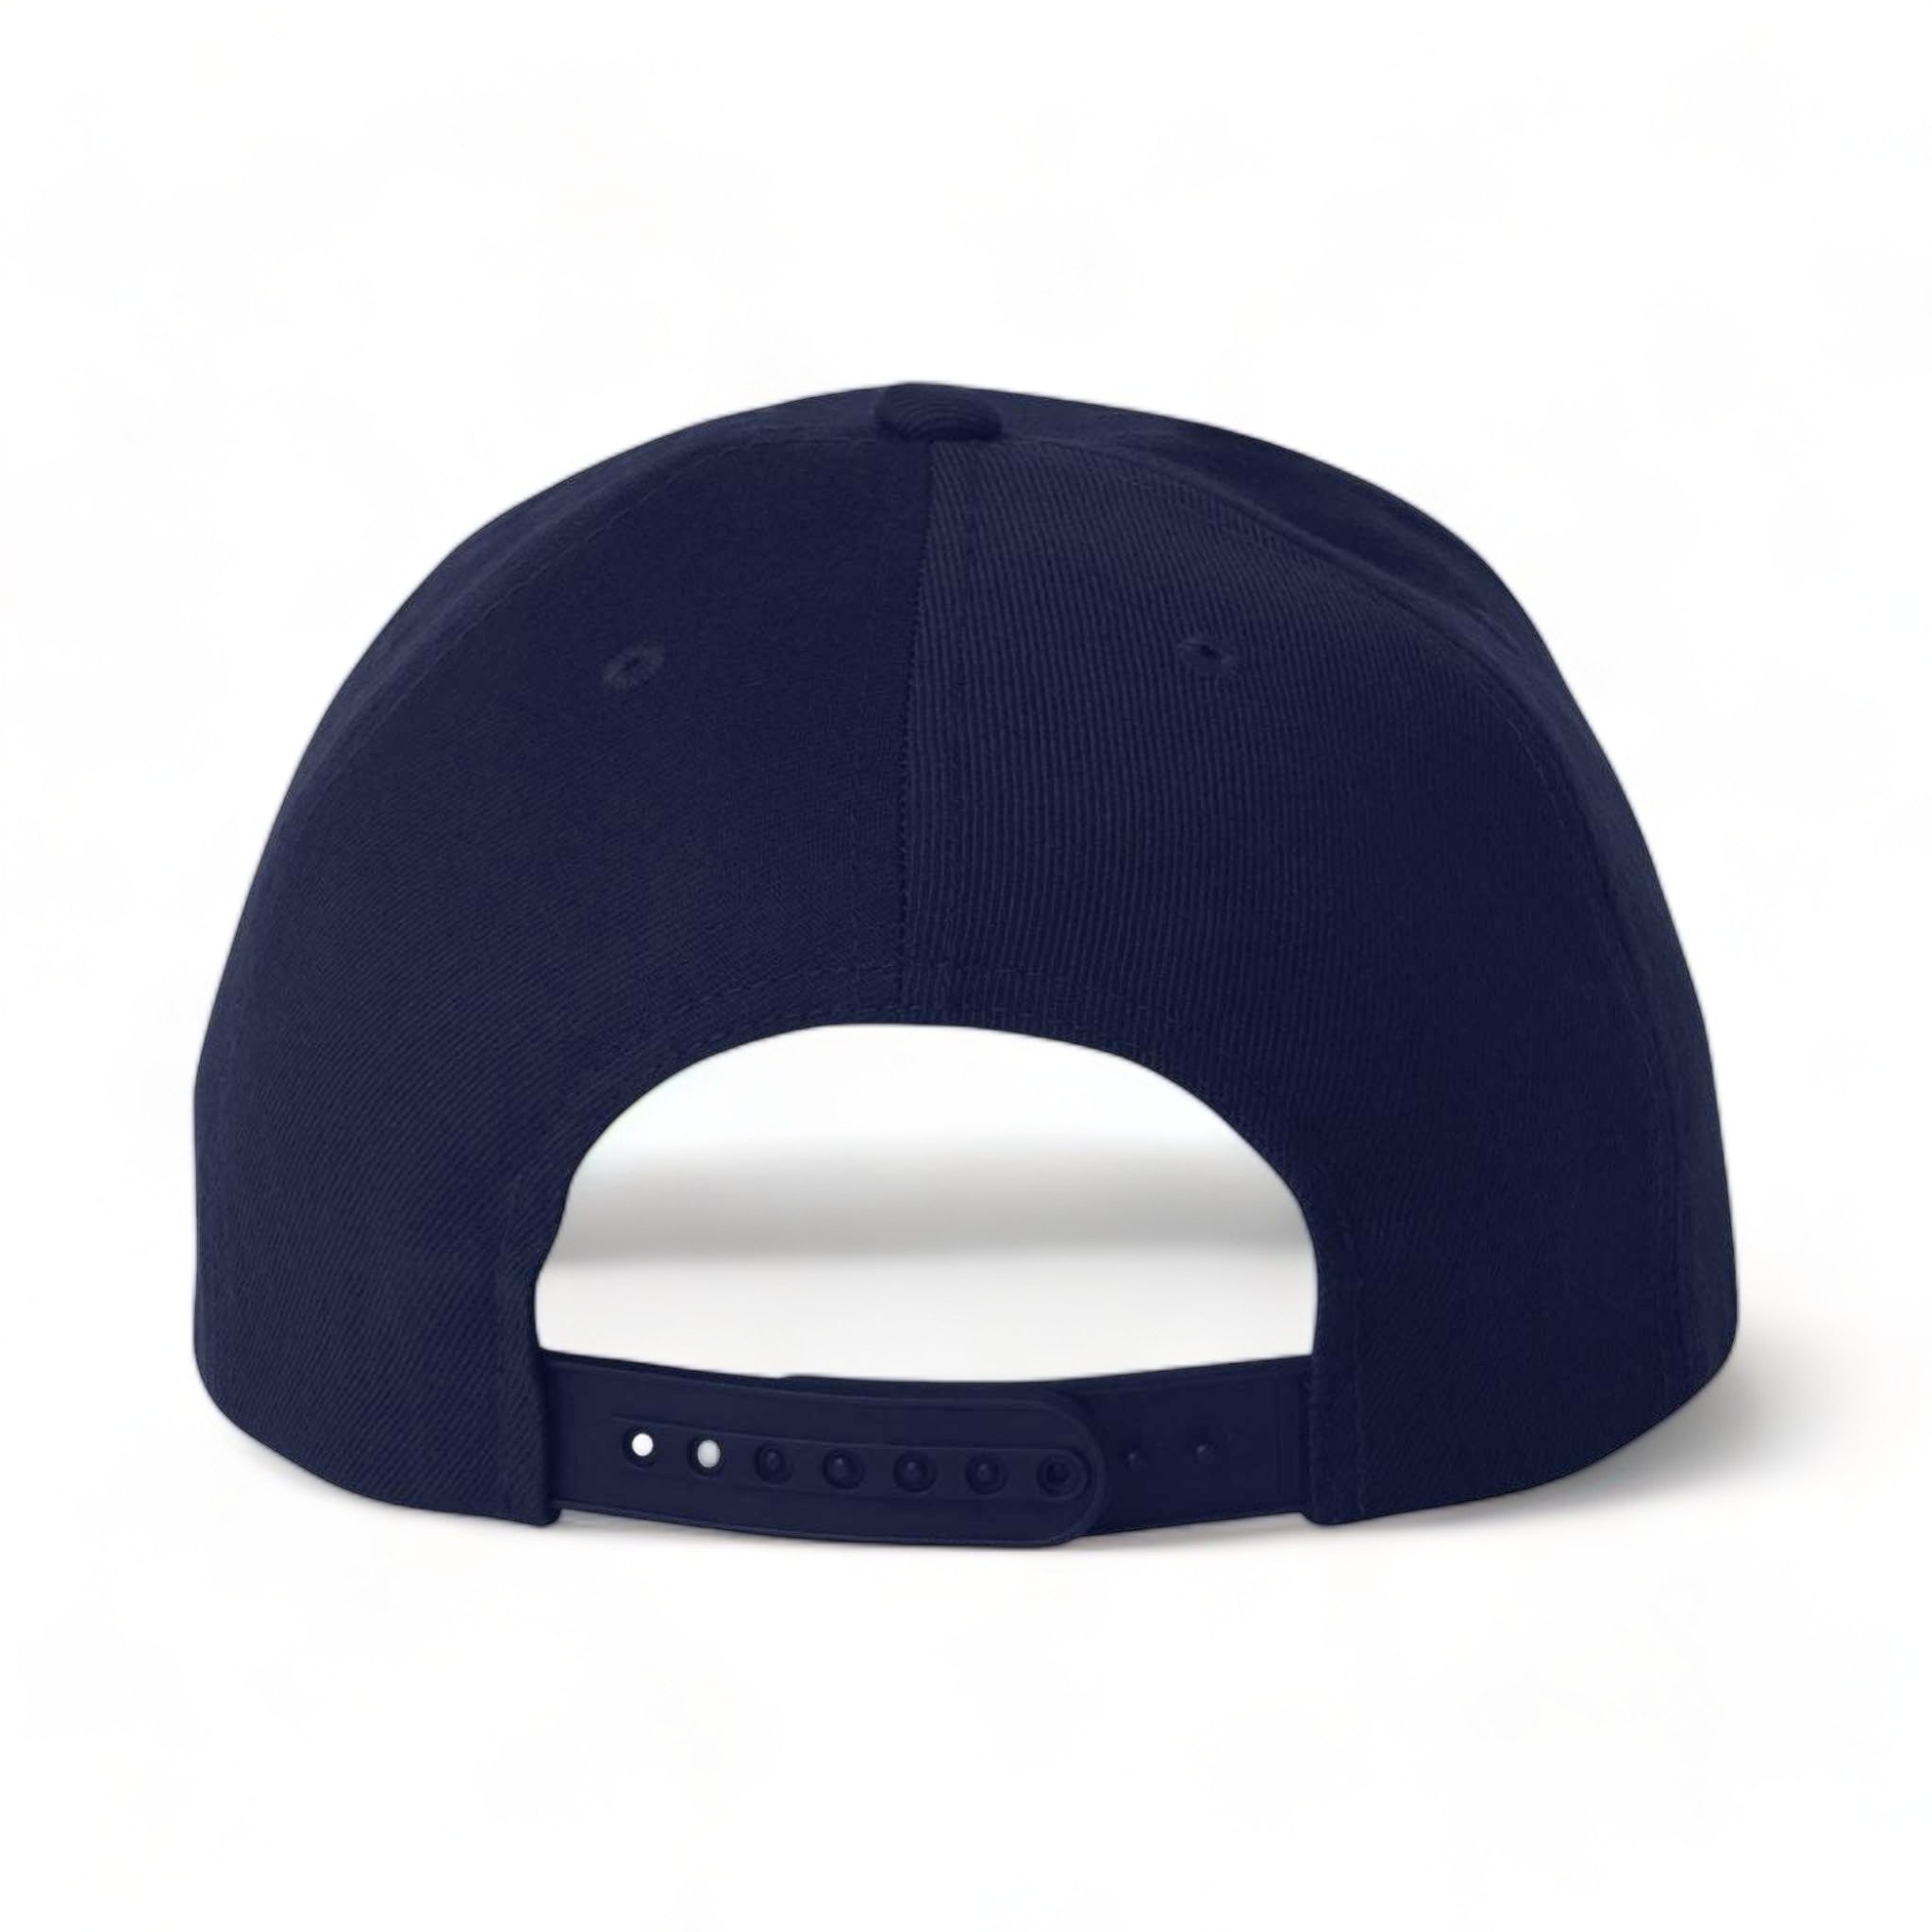 Back view of YP Classics 6089M custom hat in navy